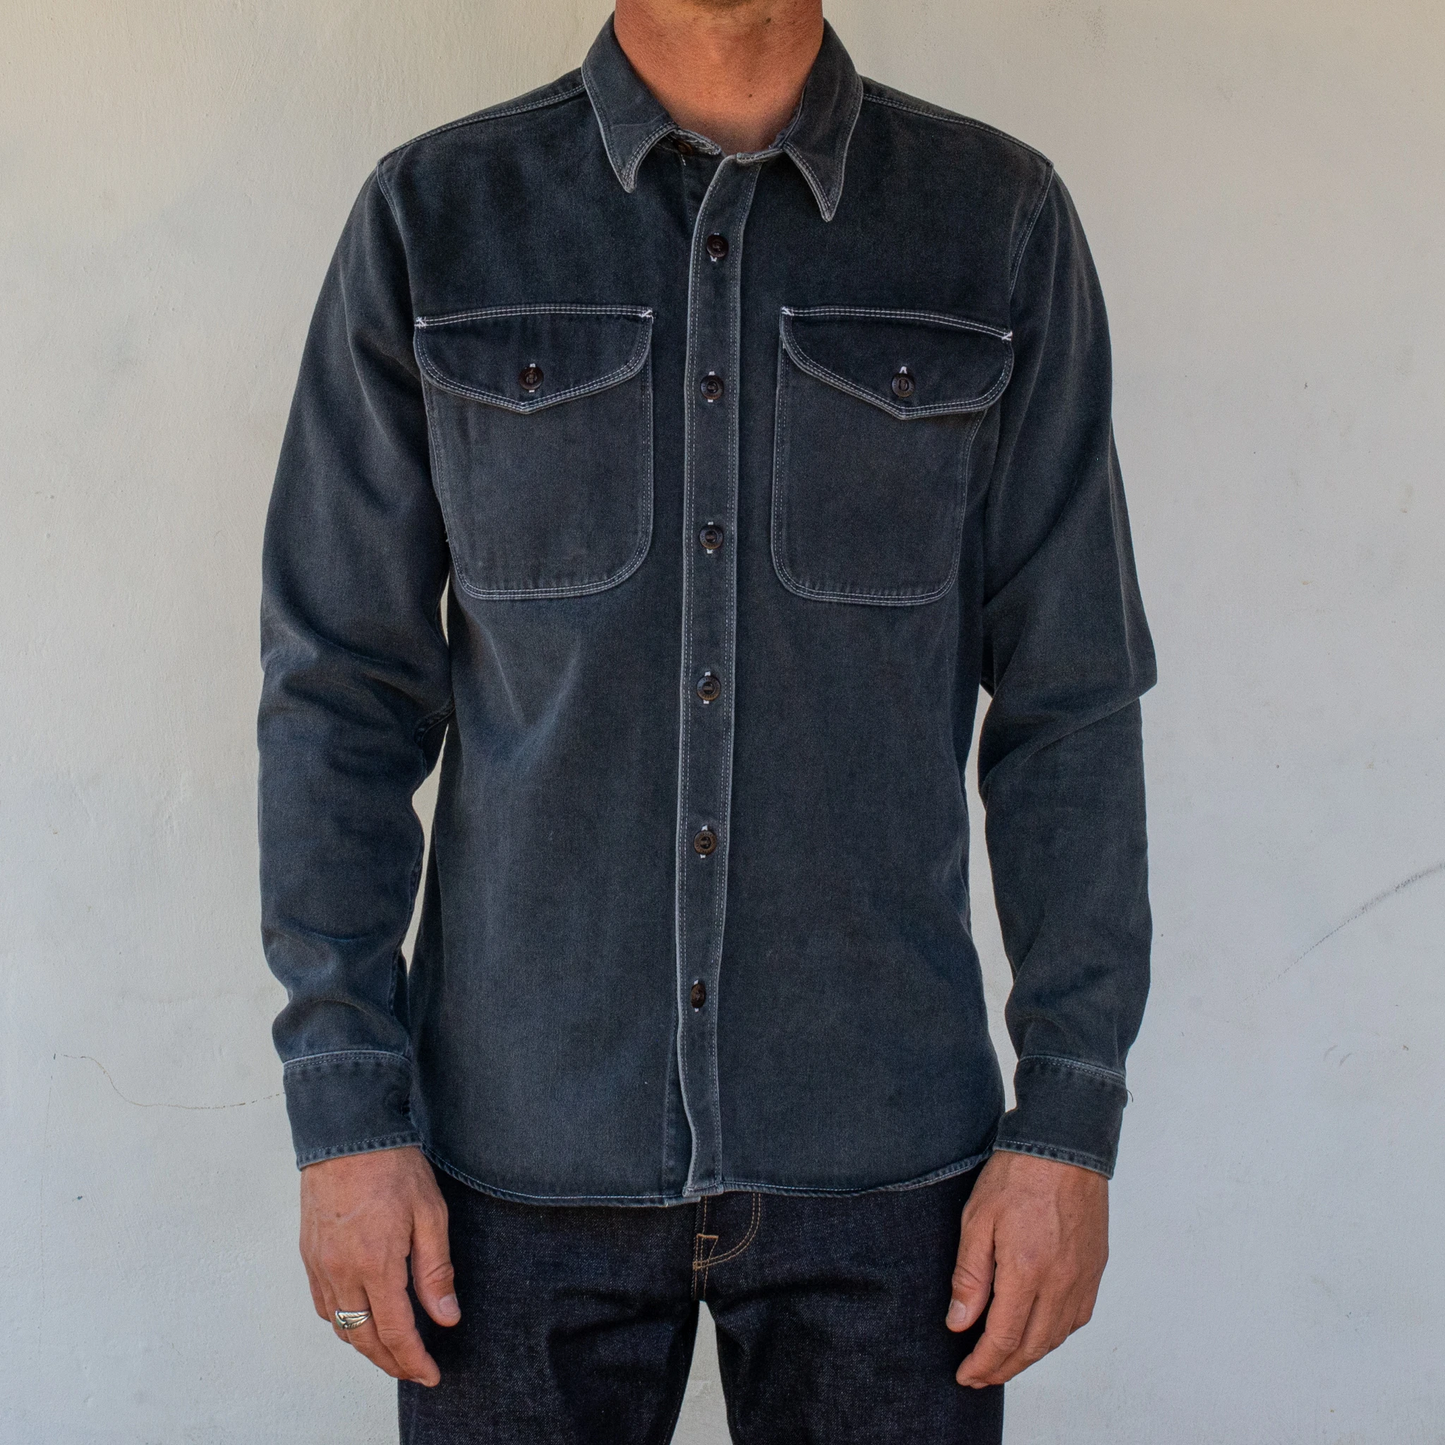 Utility Shirt in Charcoal